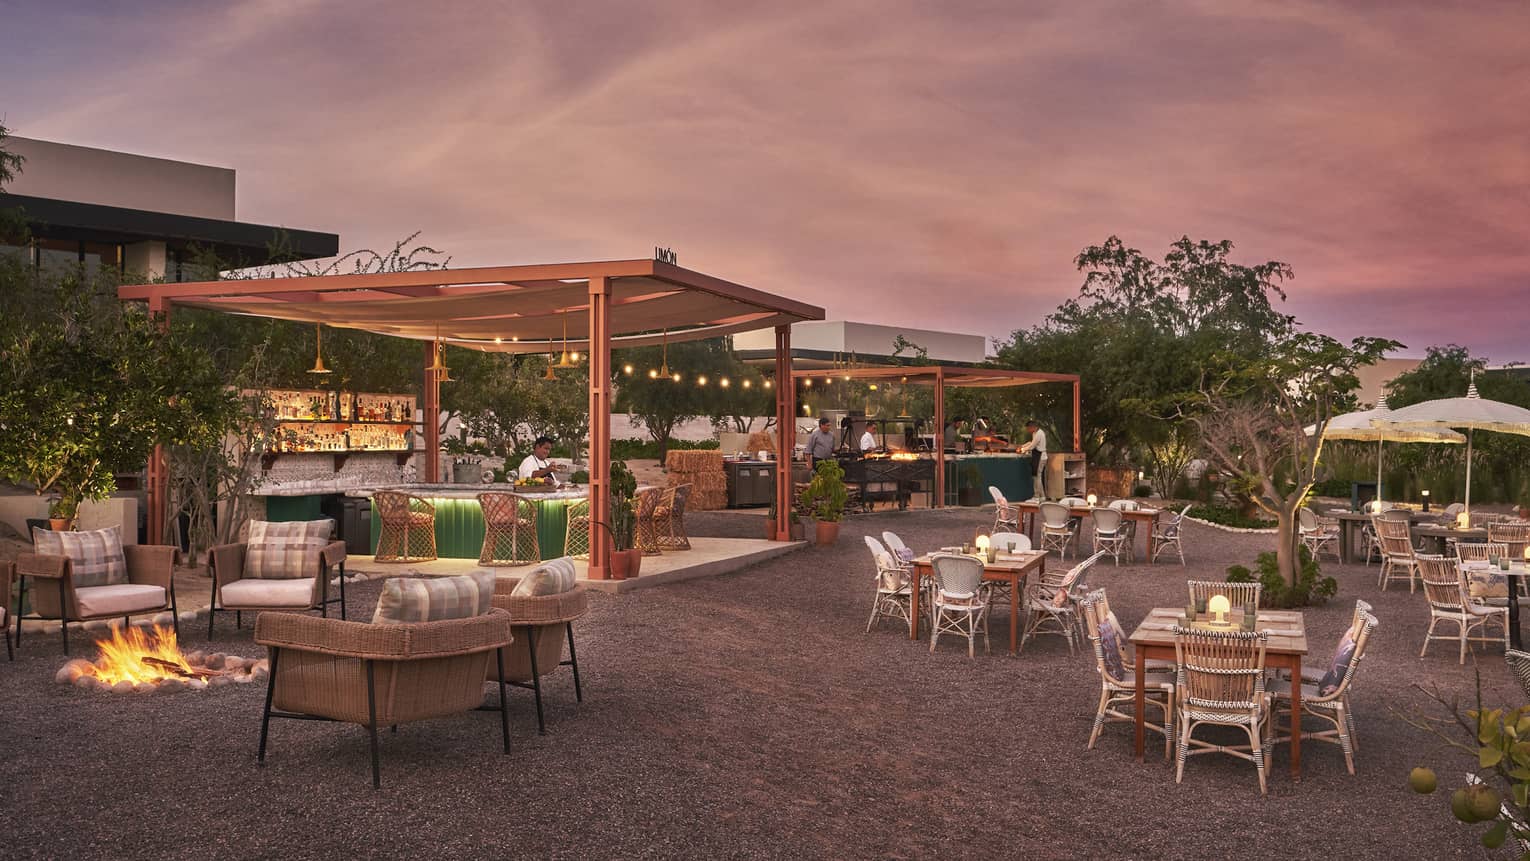 An outdoor eating area with a pink and blue sky above.